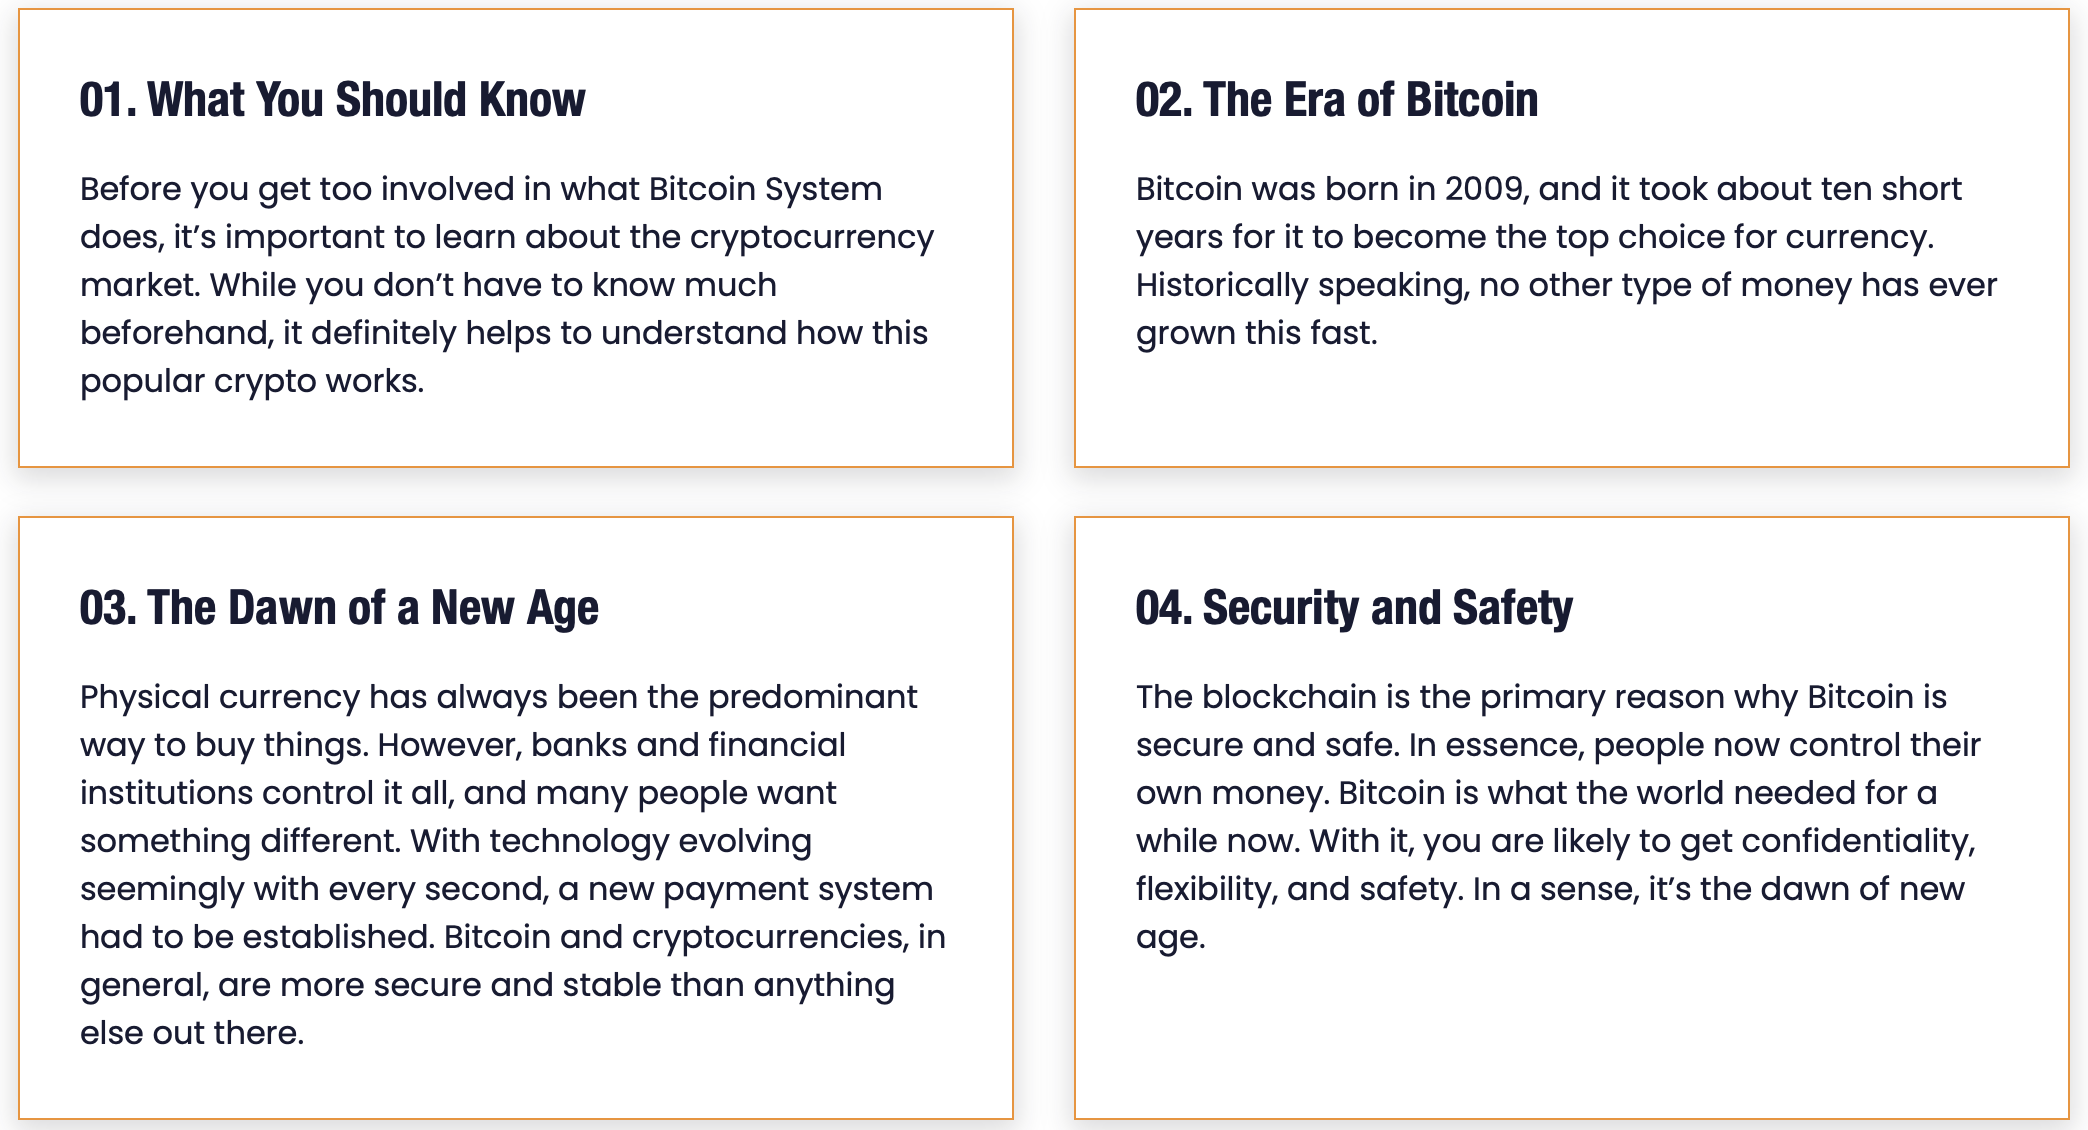 Facts about the Bitcoin system